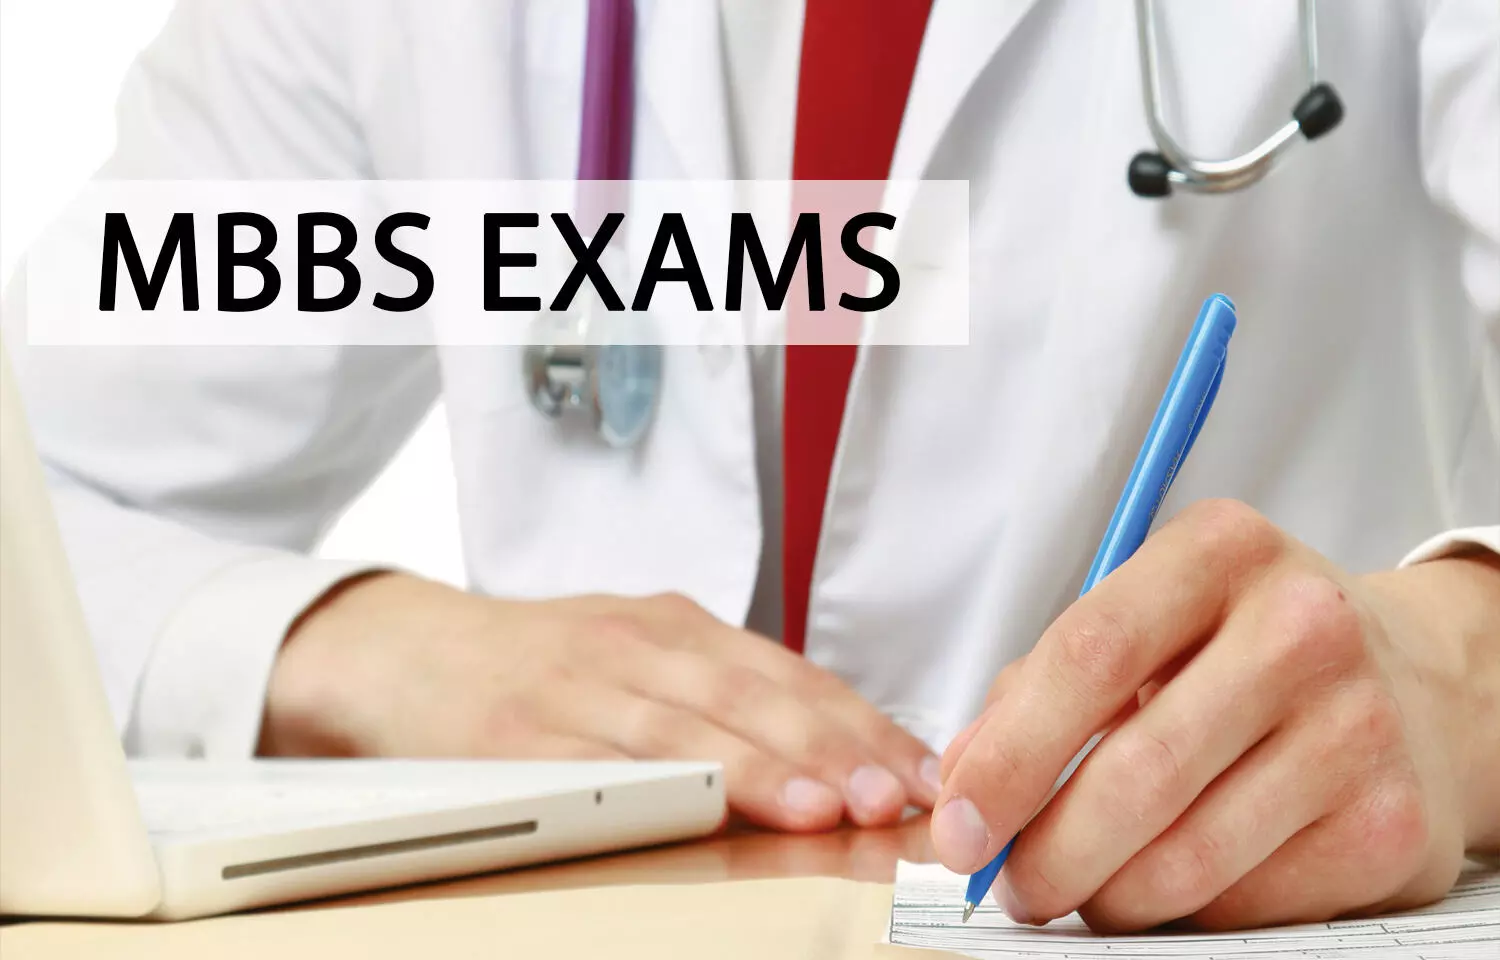 SR medical college students allege permission denial to appear in MBBS exams, KUHS refutes allegations